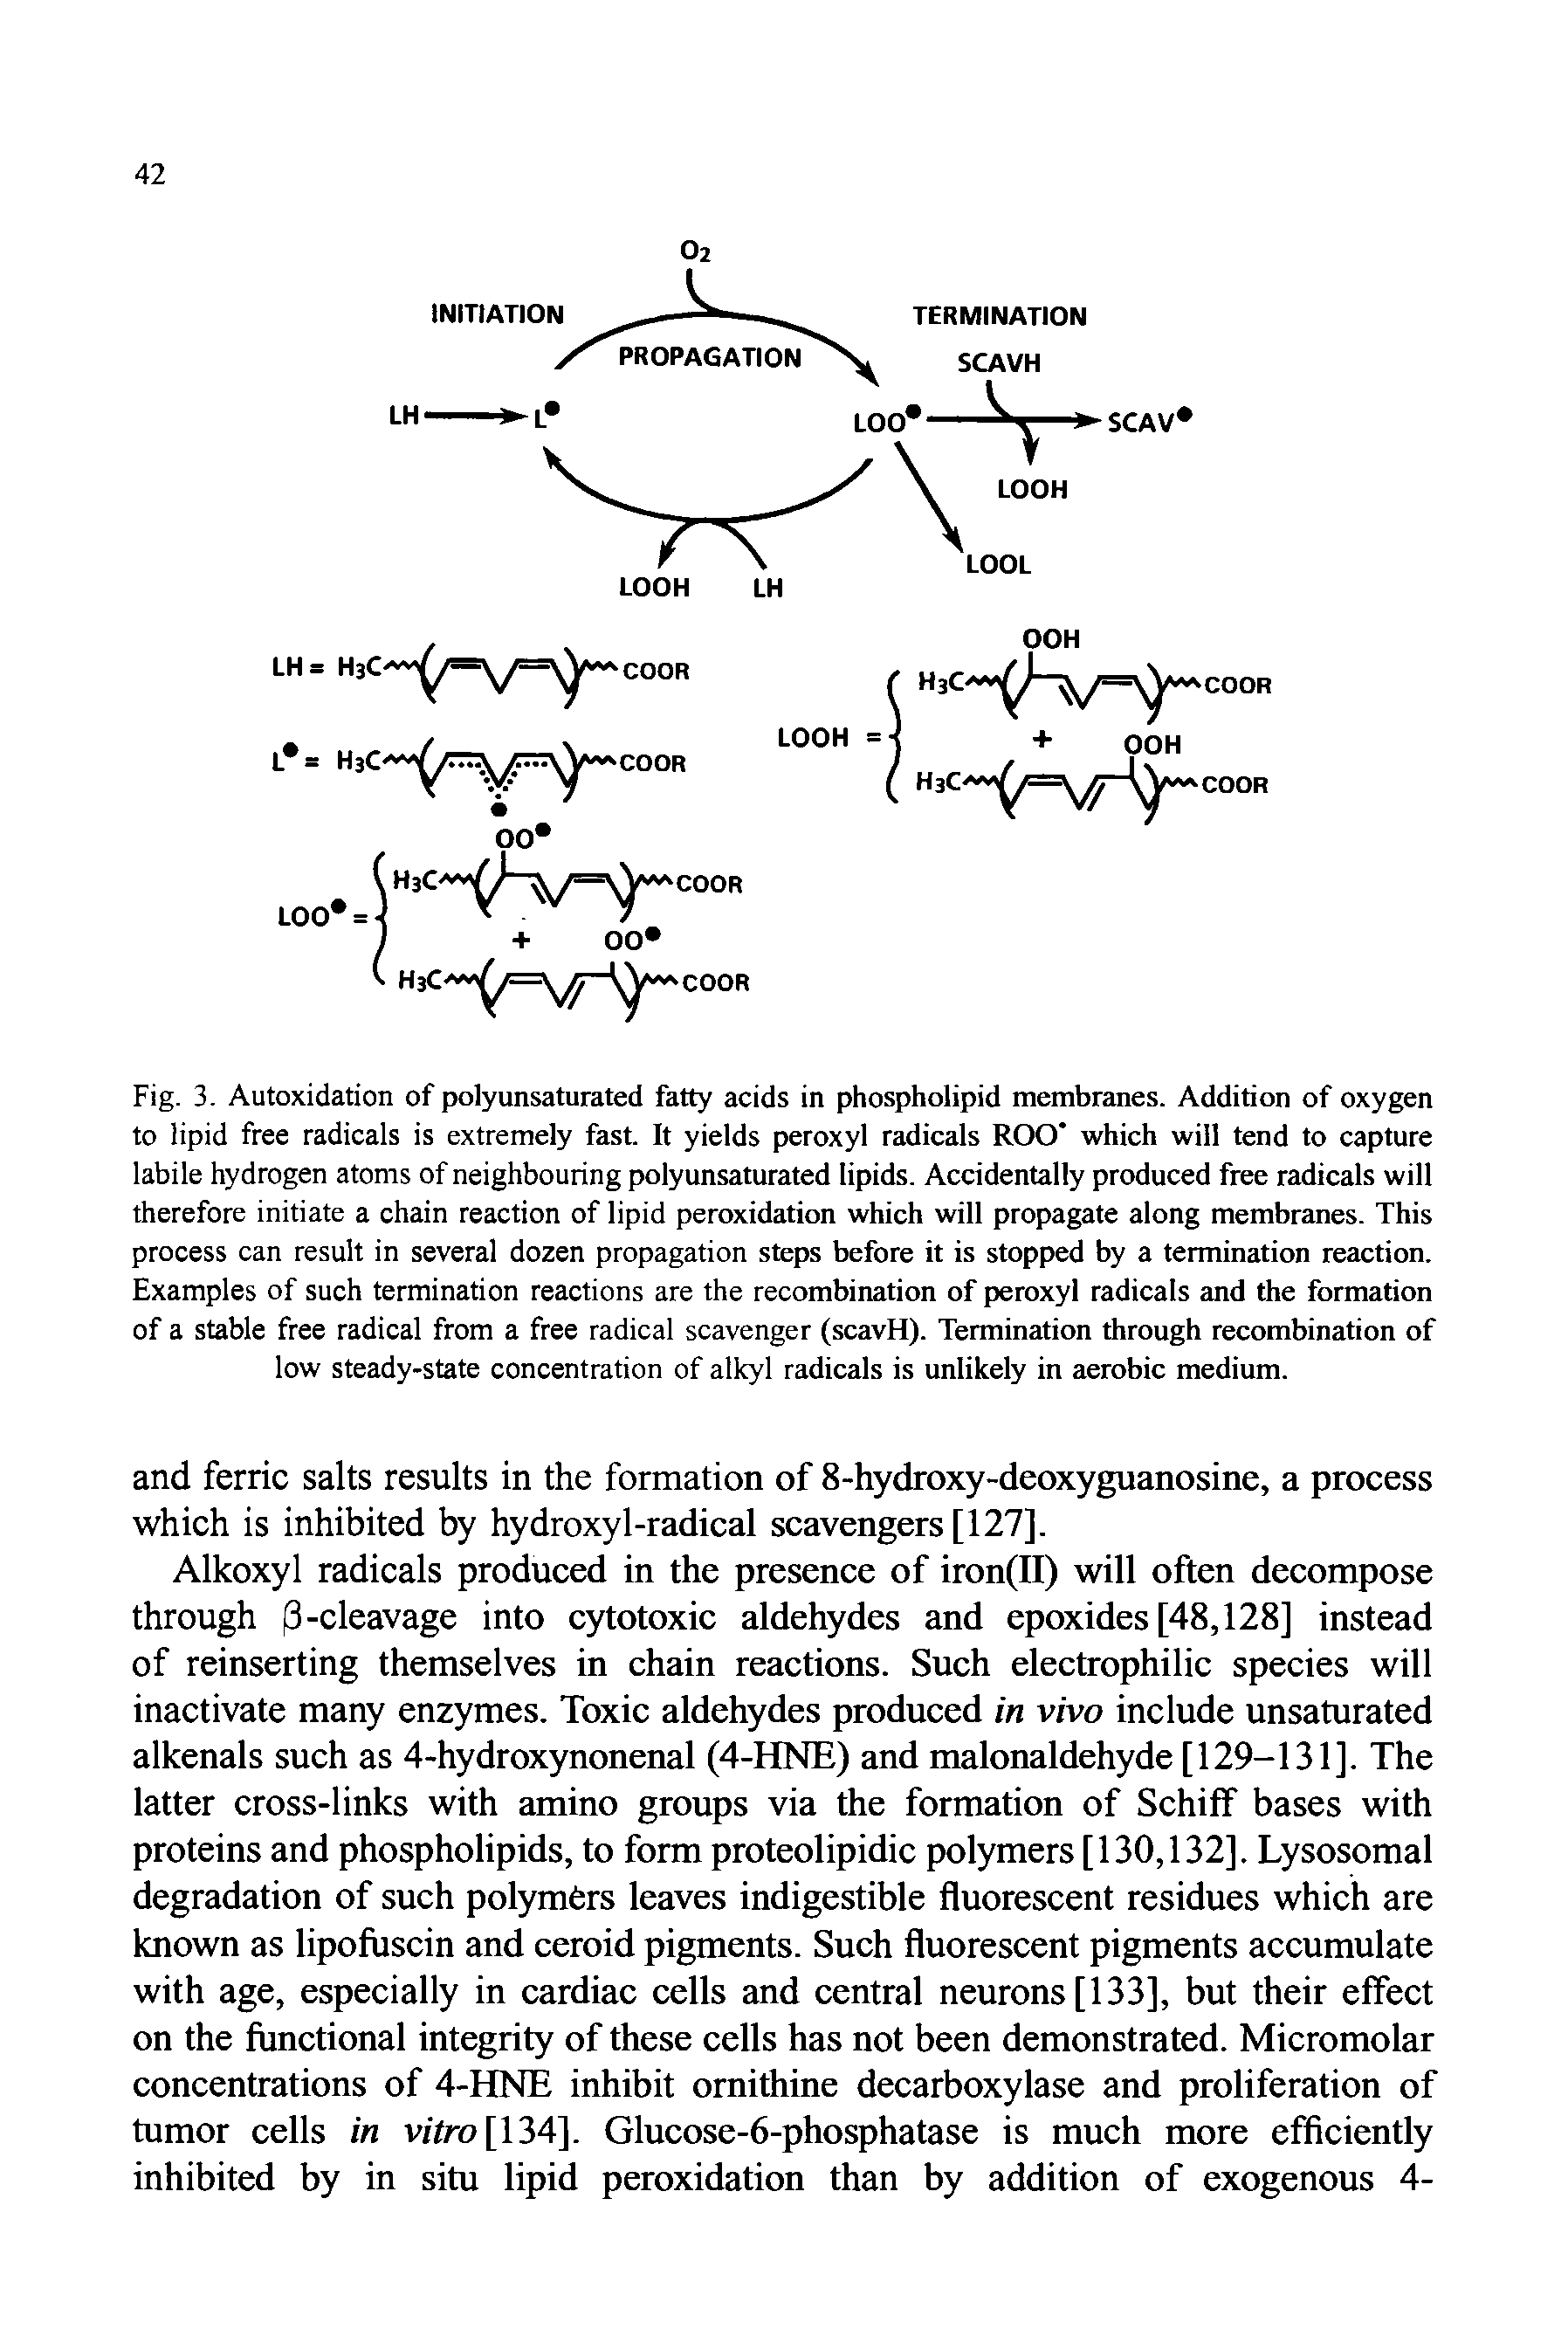 Fig. 3. Autoxidation of polyunsaturated fatty acids in phospholipid membranes. Addition of oxygen to lipid free radicals is extremely fast. It yields peroxyl radicals ROO which will tend to capture labile hydrogen atoms of neighbouring polyunsaturated lipids. Accidentally produced free radicals will therefore initiate a chain reaction of lipid peroxidation which will propagate along membranes. This process can result in several dozen propagation steps before it is stopped by a termination reaction. Examples of such termination reactions are the recombination of peroxyl radicals and the formation of a stable free radical from a free radical scavenger (scavH). Termination through recombination of low steady-state concentration of alkyl radicals is unlikely in aerobic medium.